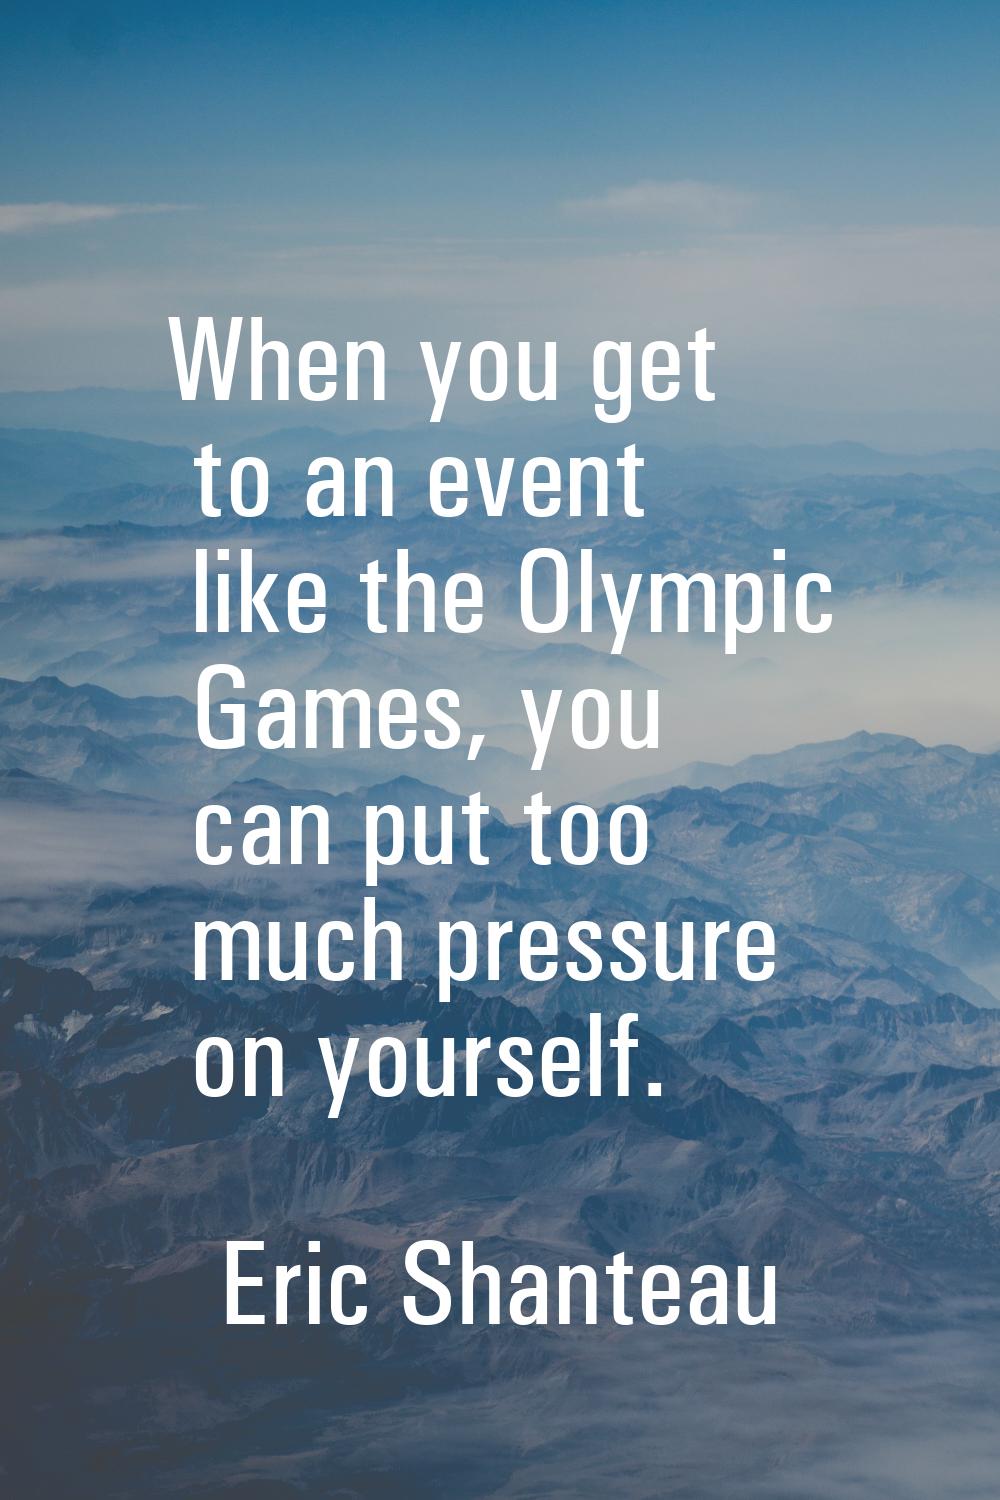 When you get to an event like the Olympic Games, you can put too much pressure on yourself.